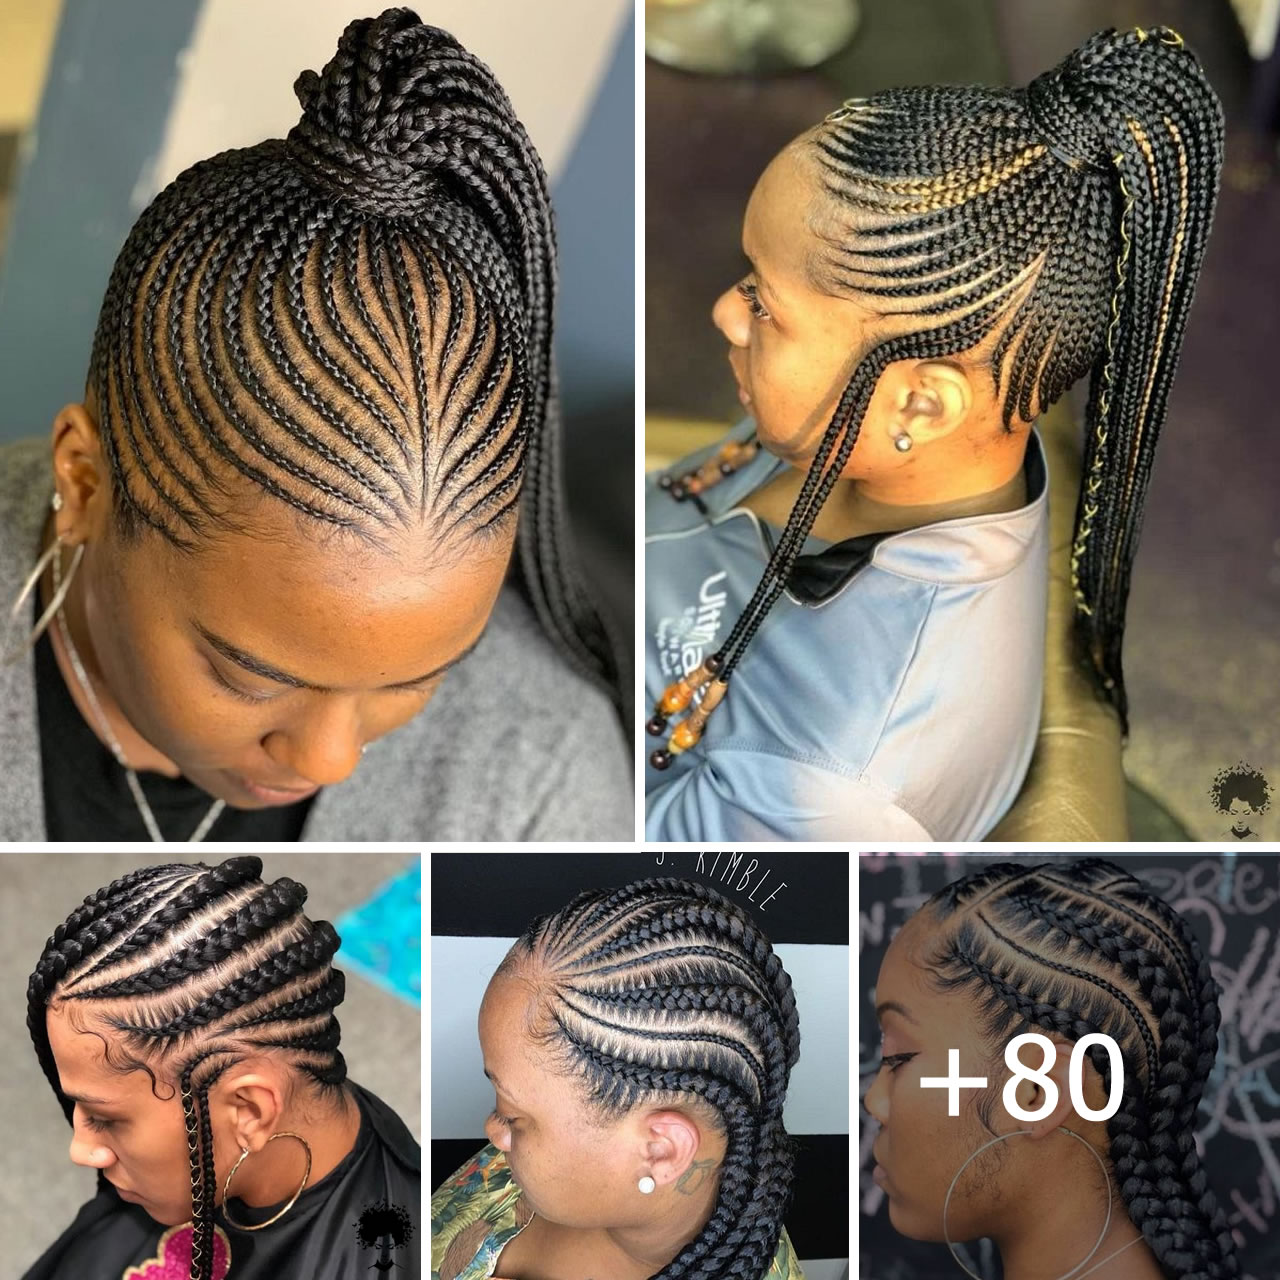 80 Stunning Ghana Braids Hairstyles for Your Next Photoshoot